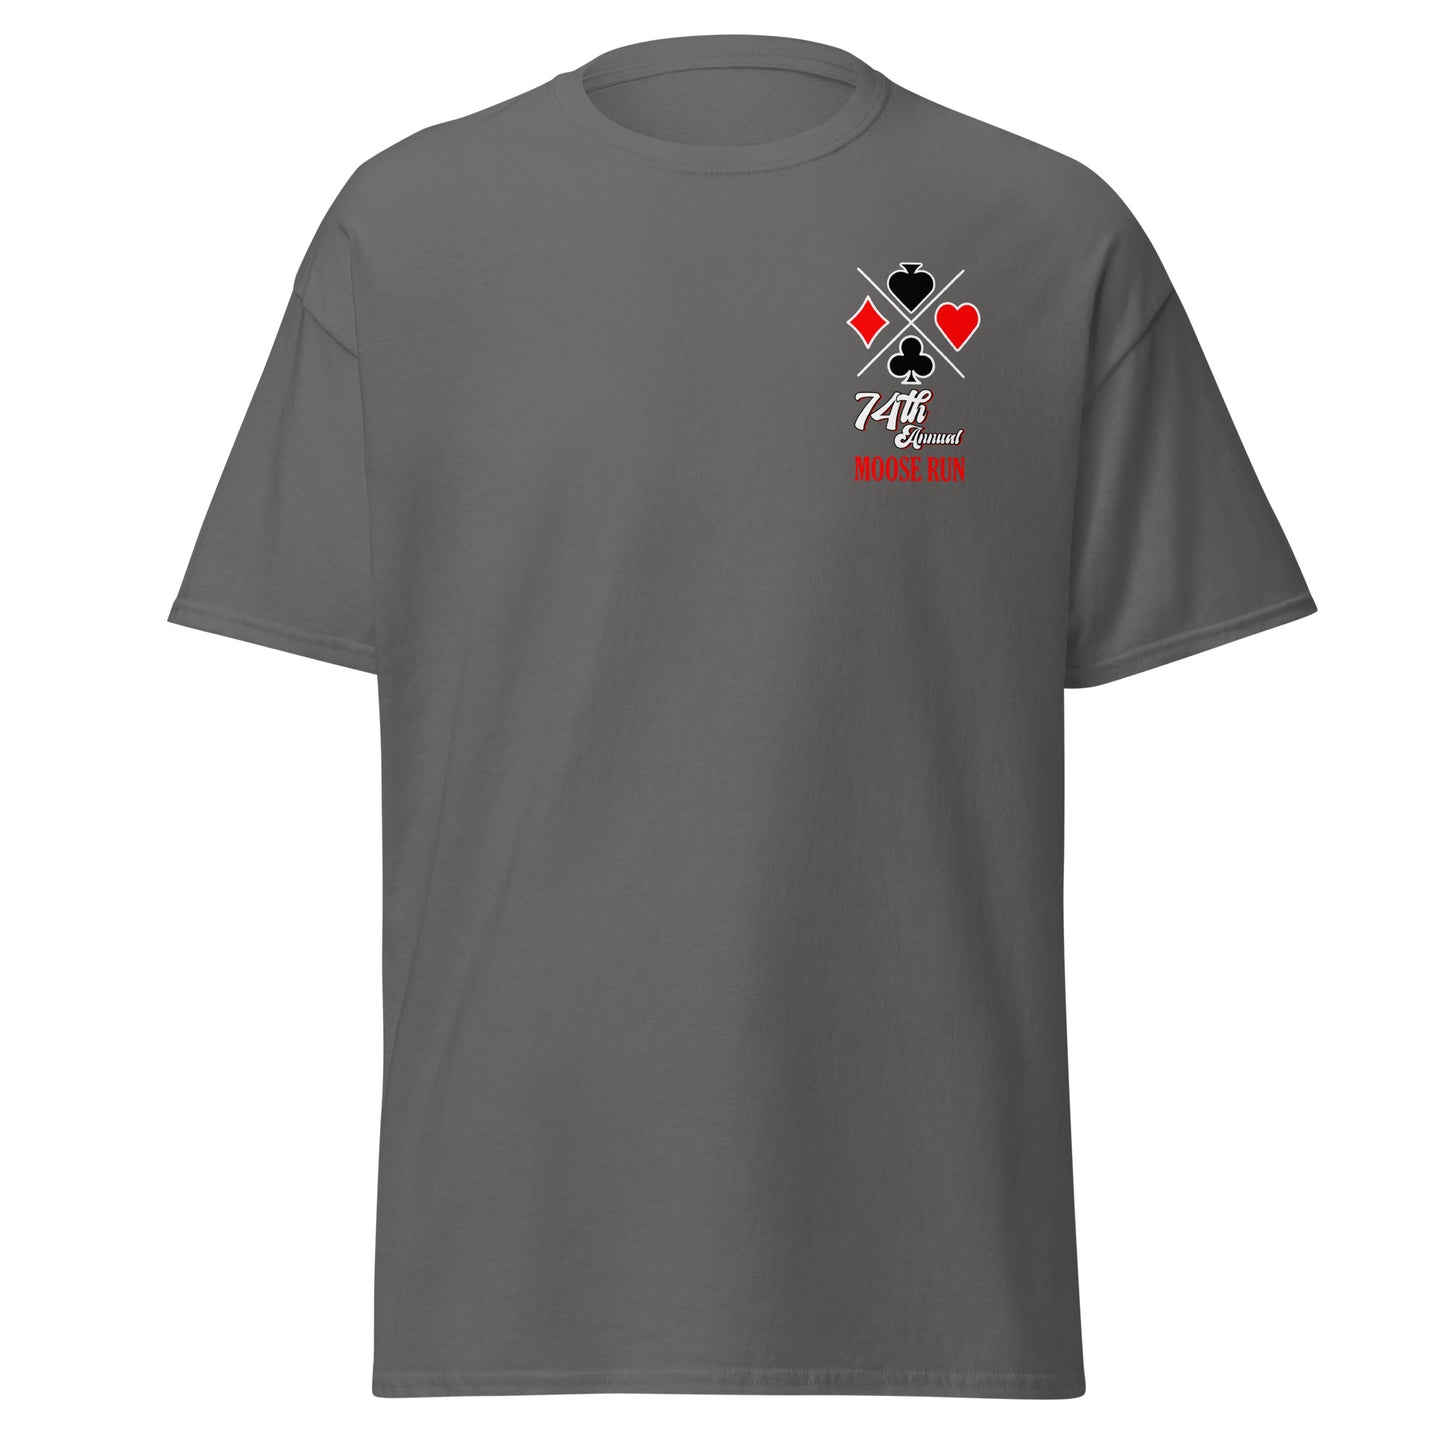 Adult Official Four Aces 74th Moose Run Event Shirt